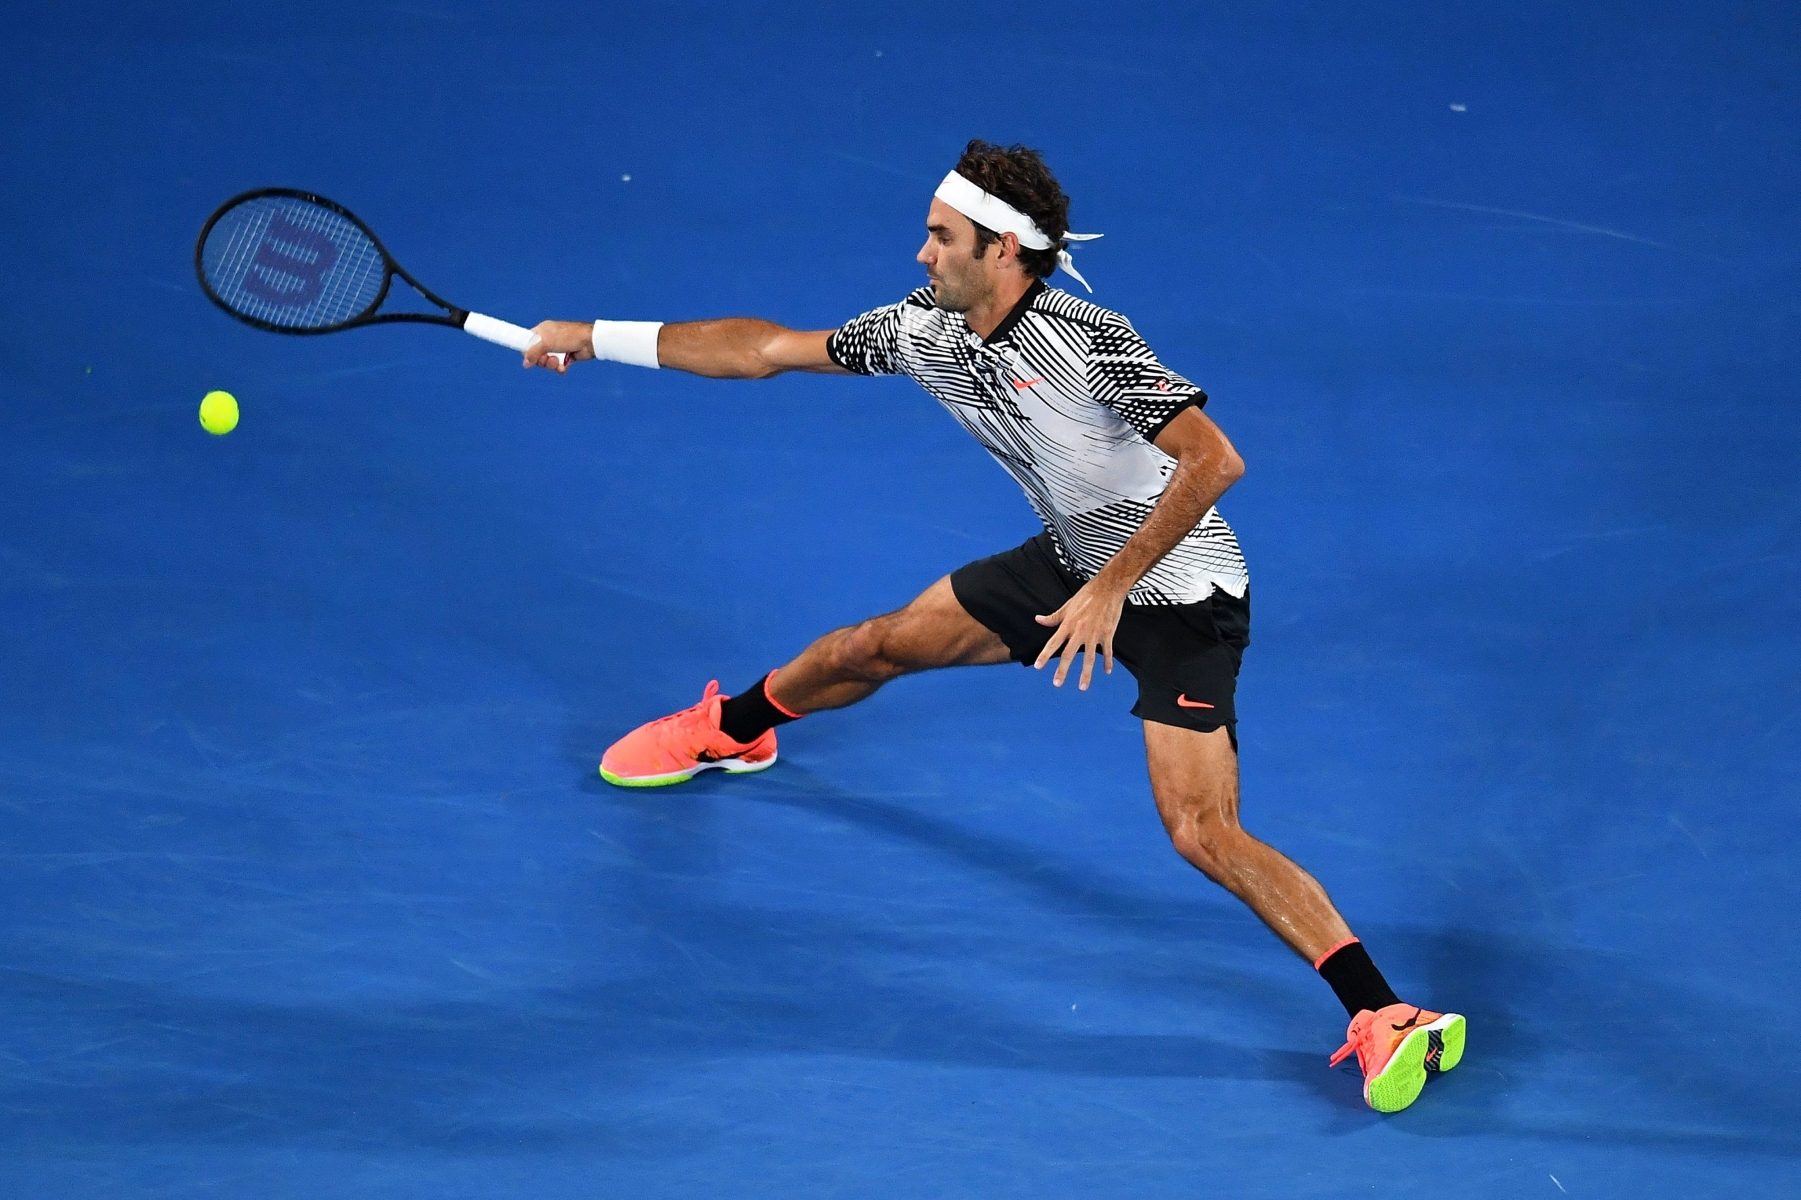 epa05721411 Roger Federer of Switzerland in action against Jurgen Melzer of Austria during their Men's Singles first round match of the Australian Open Grand Slam tennis tournament in Melbourne, Australia, 16 January 2017.  EPA/TRACEY NEARMY  AUSTRALIA AND NEW ZEALAND OUT